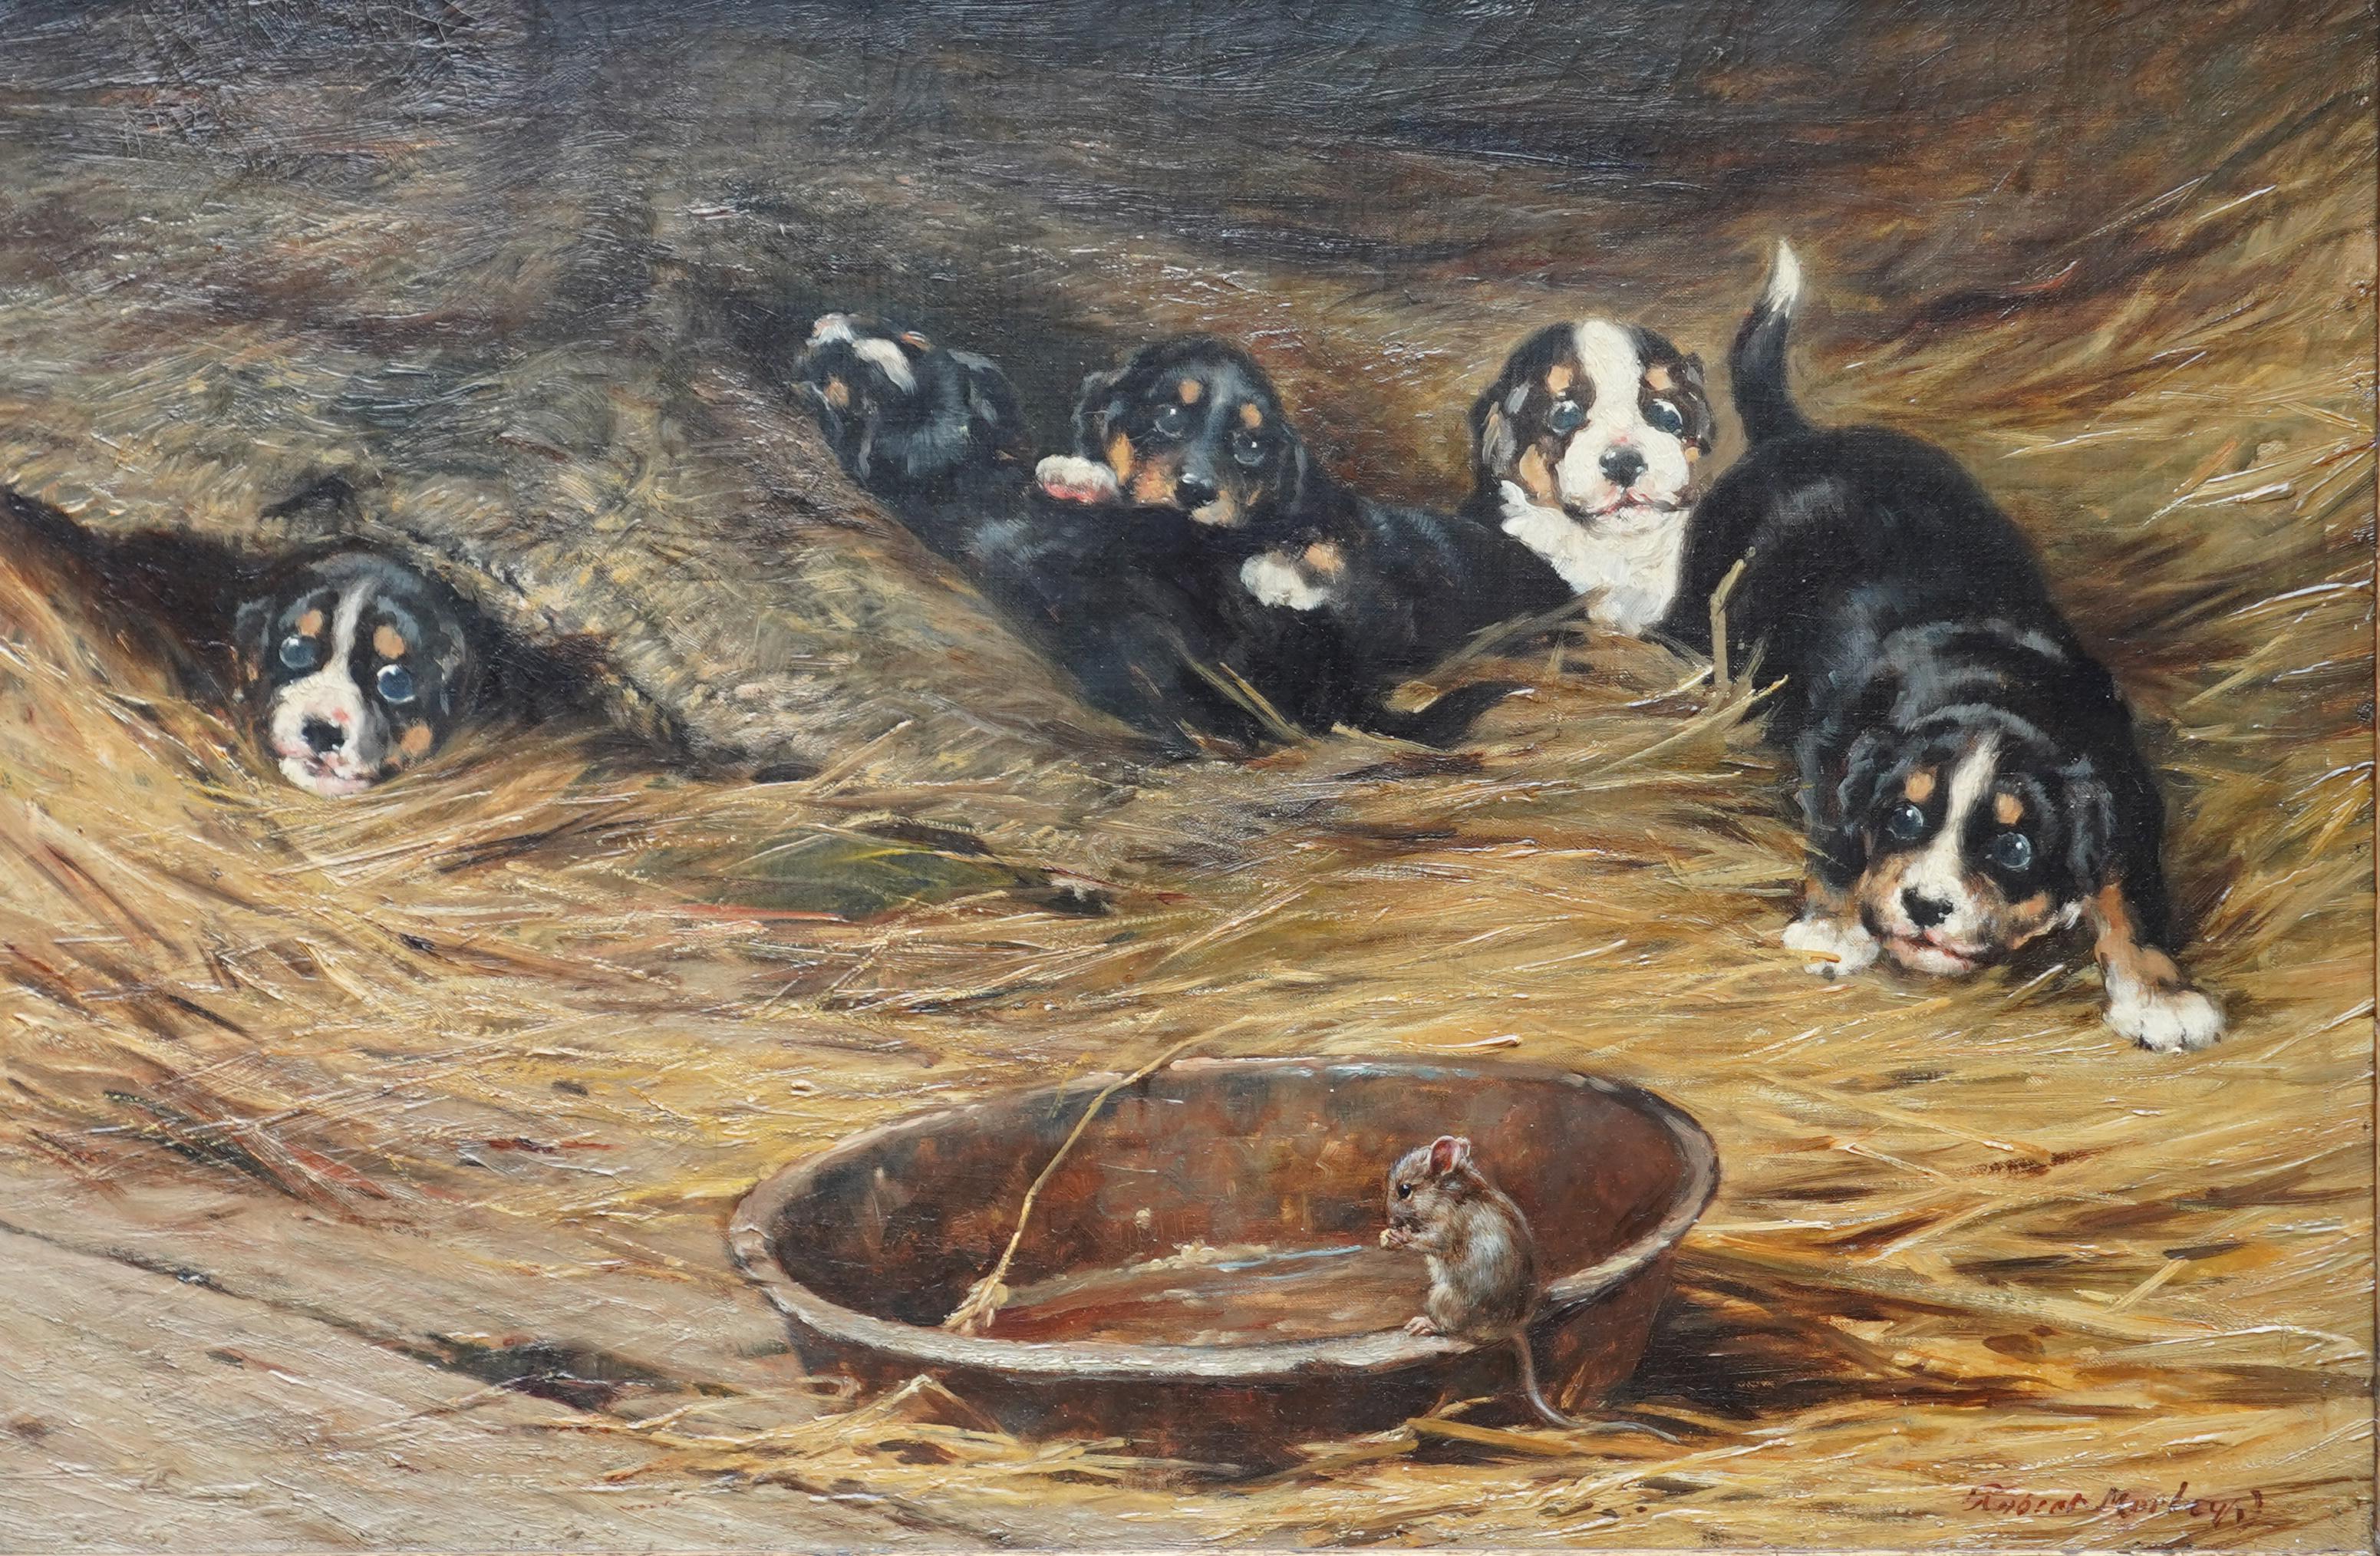 Mouse with Spaniel Puppies - British Edwardian art dog portrait oil painting 4